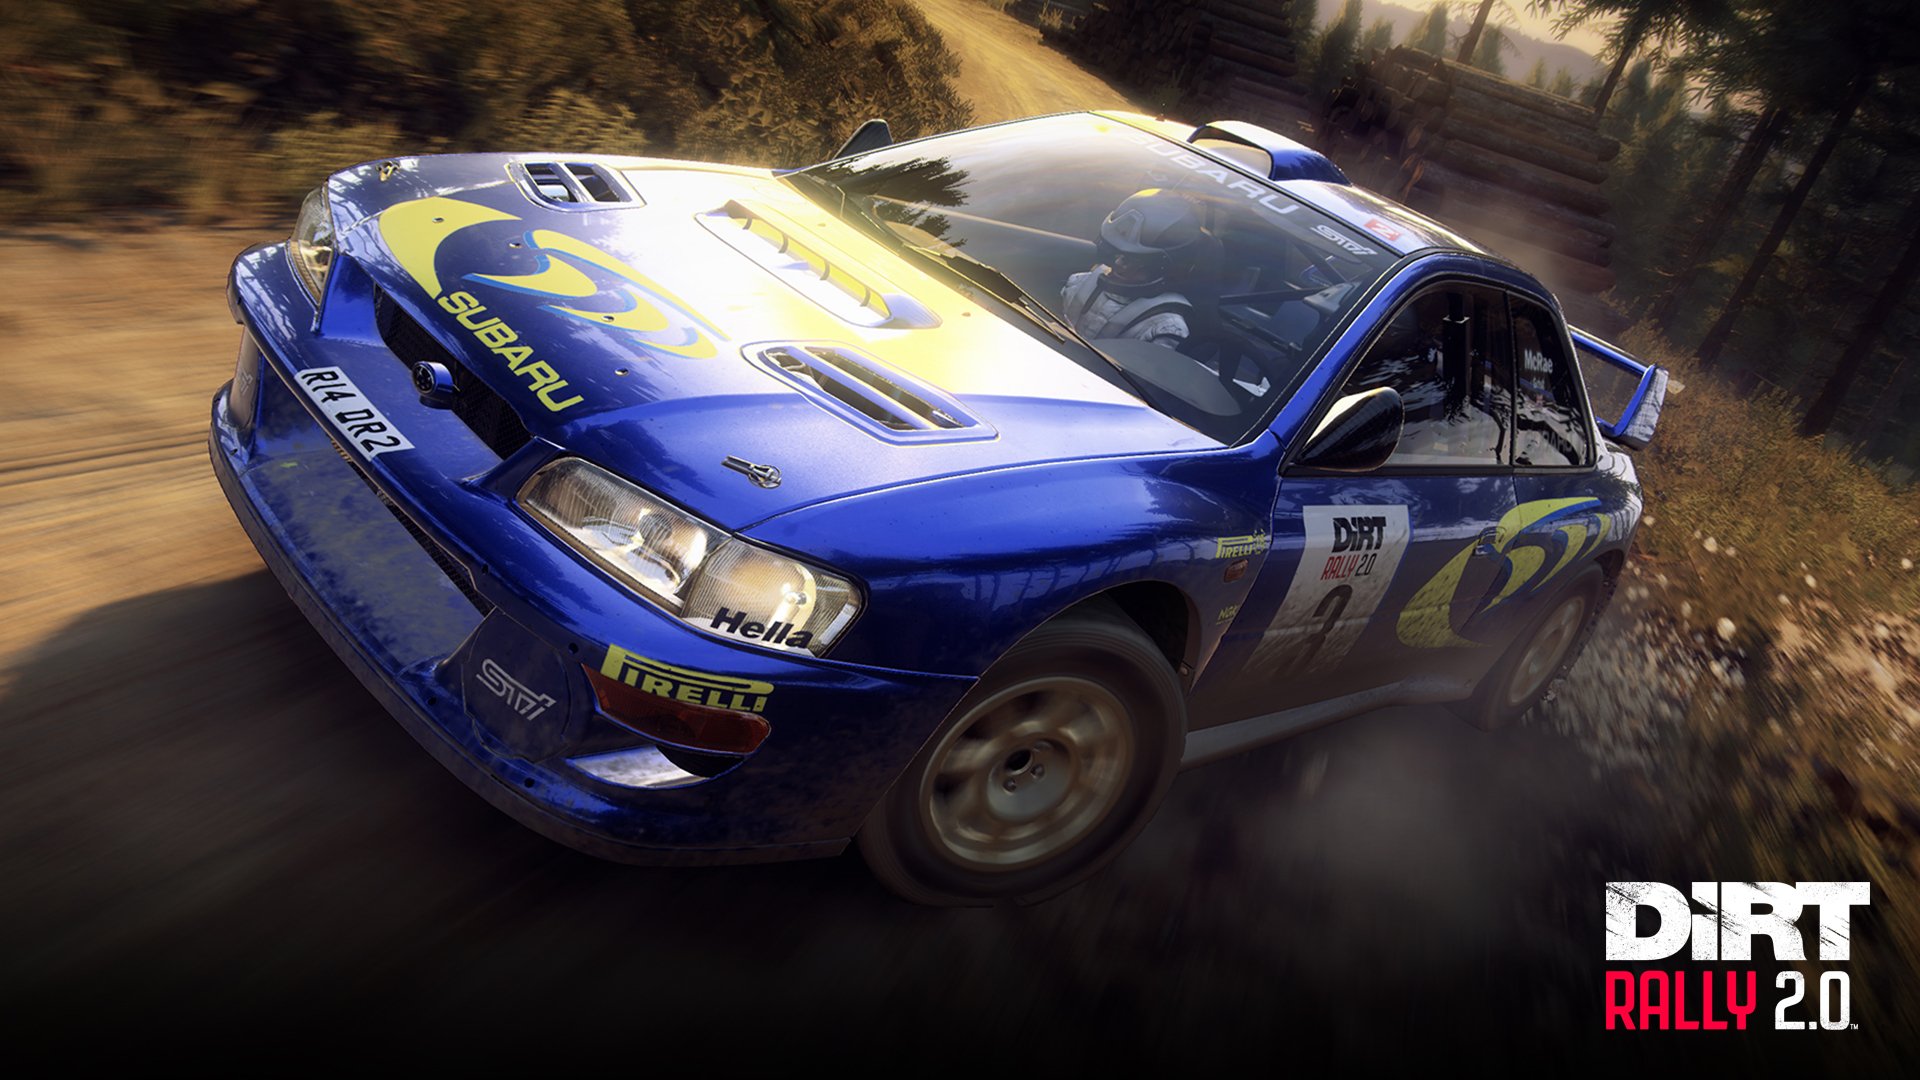 More information about "DiRT Rally 2.0 Game of the Year Edition disponibile, con il DLC Colin McRae FLAT OUT"